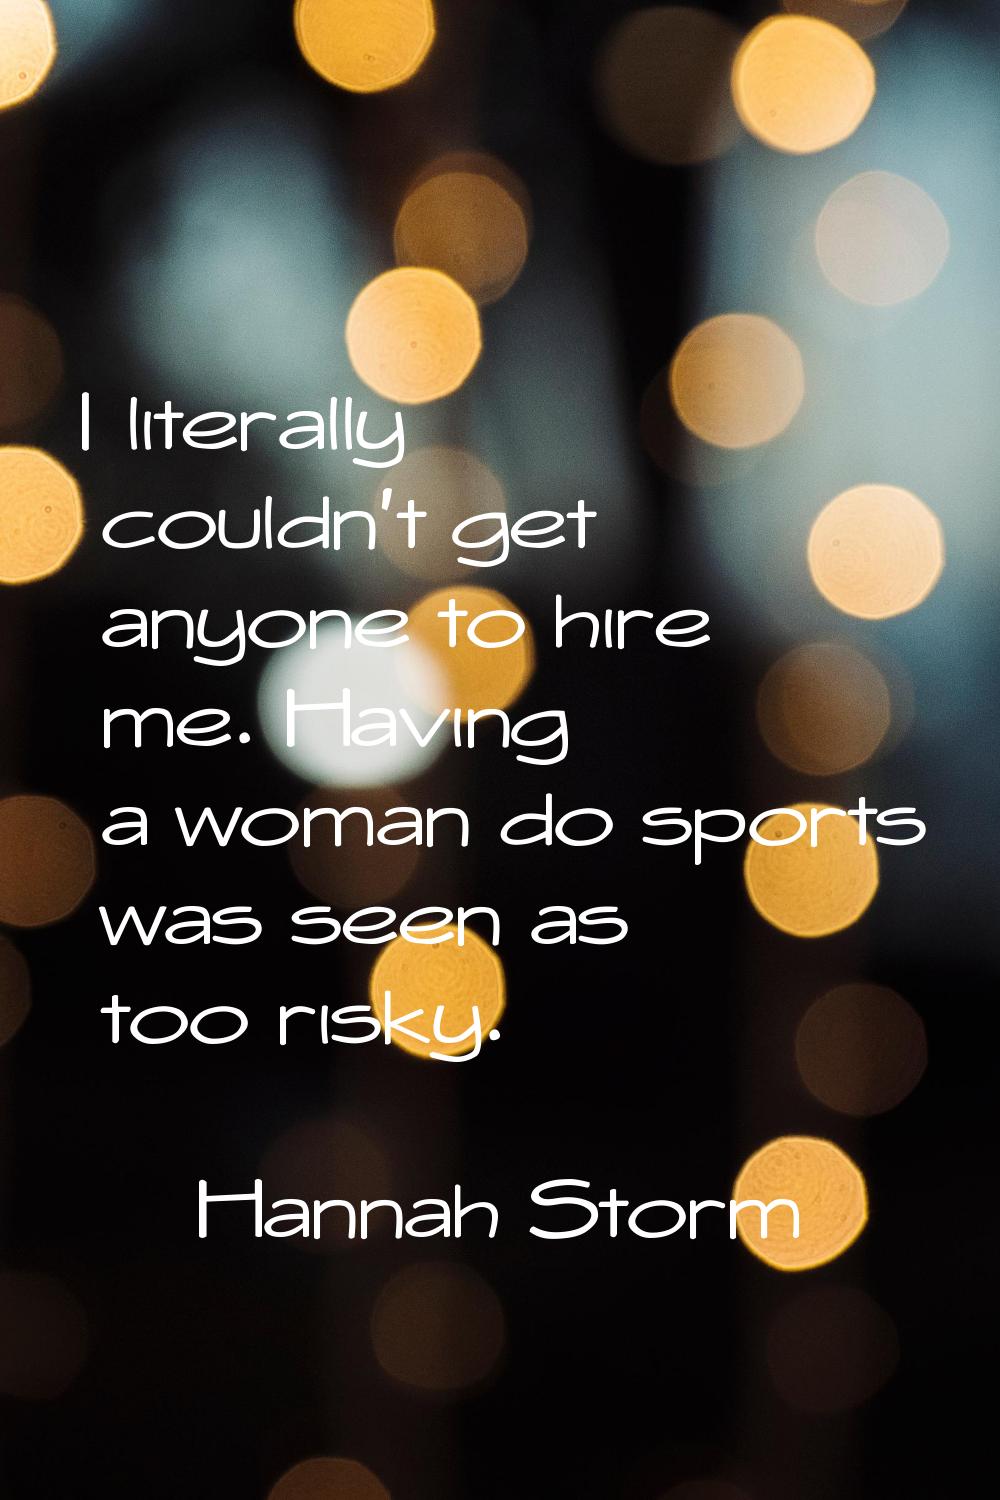 I literally couldn't get anyone to hire me. Having a woman do sports was seen as too risky.